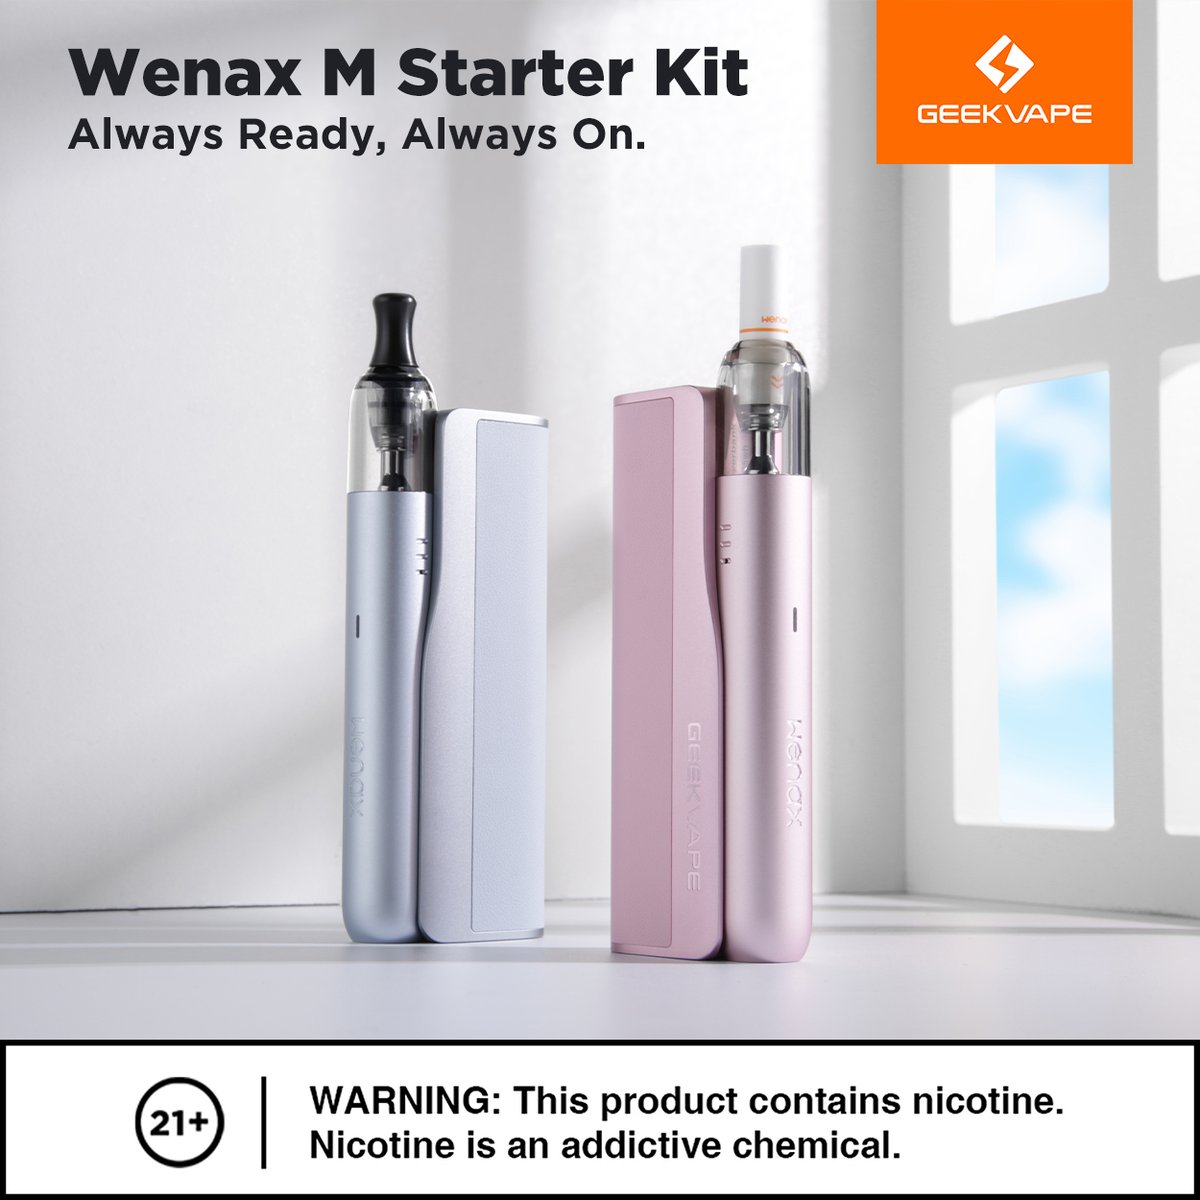 Introducing the captivating Slate Blue and Petal Pink in harmony, bringing a touch of sophistication to the Wenax M Starter Kit collection. 💙🌸 #WenaxMStarterKit #geekvape #geekvapetech